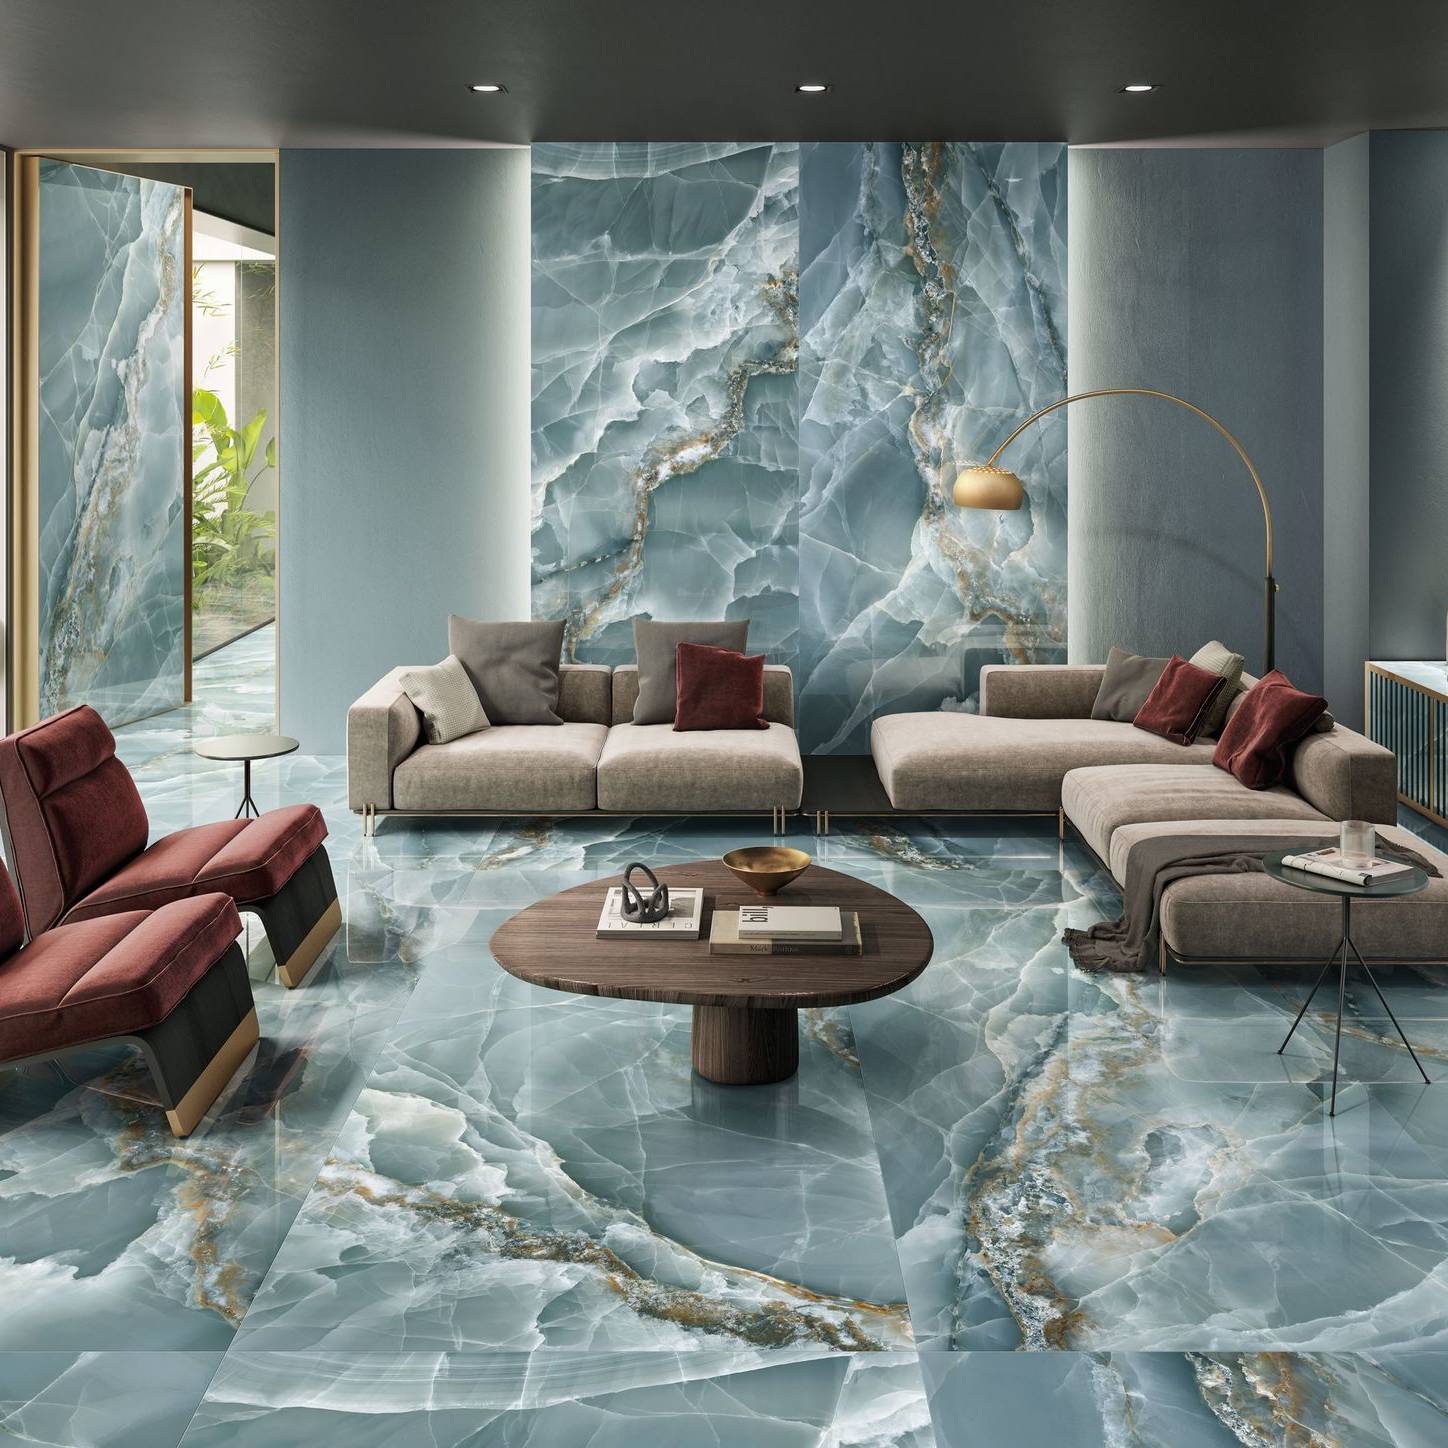 Onyx 3 | Stones And More | Finest selection of Mosaics, Glass, Tile and Stone